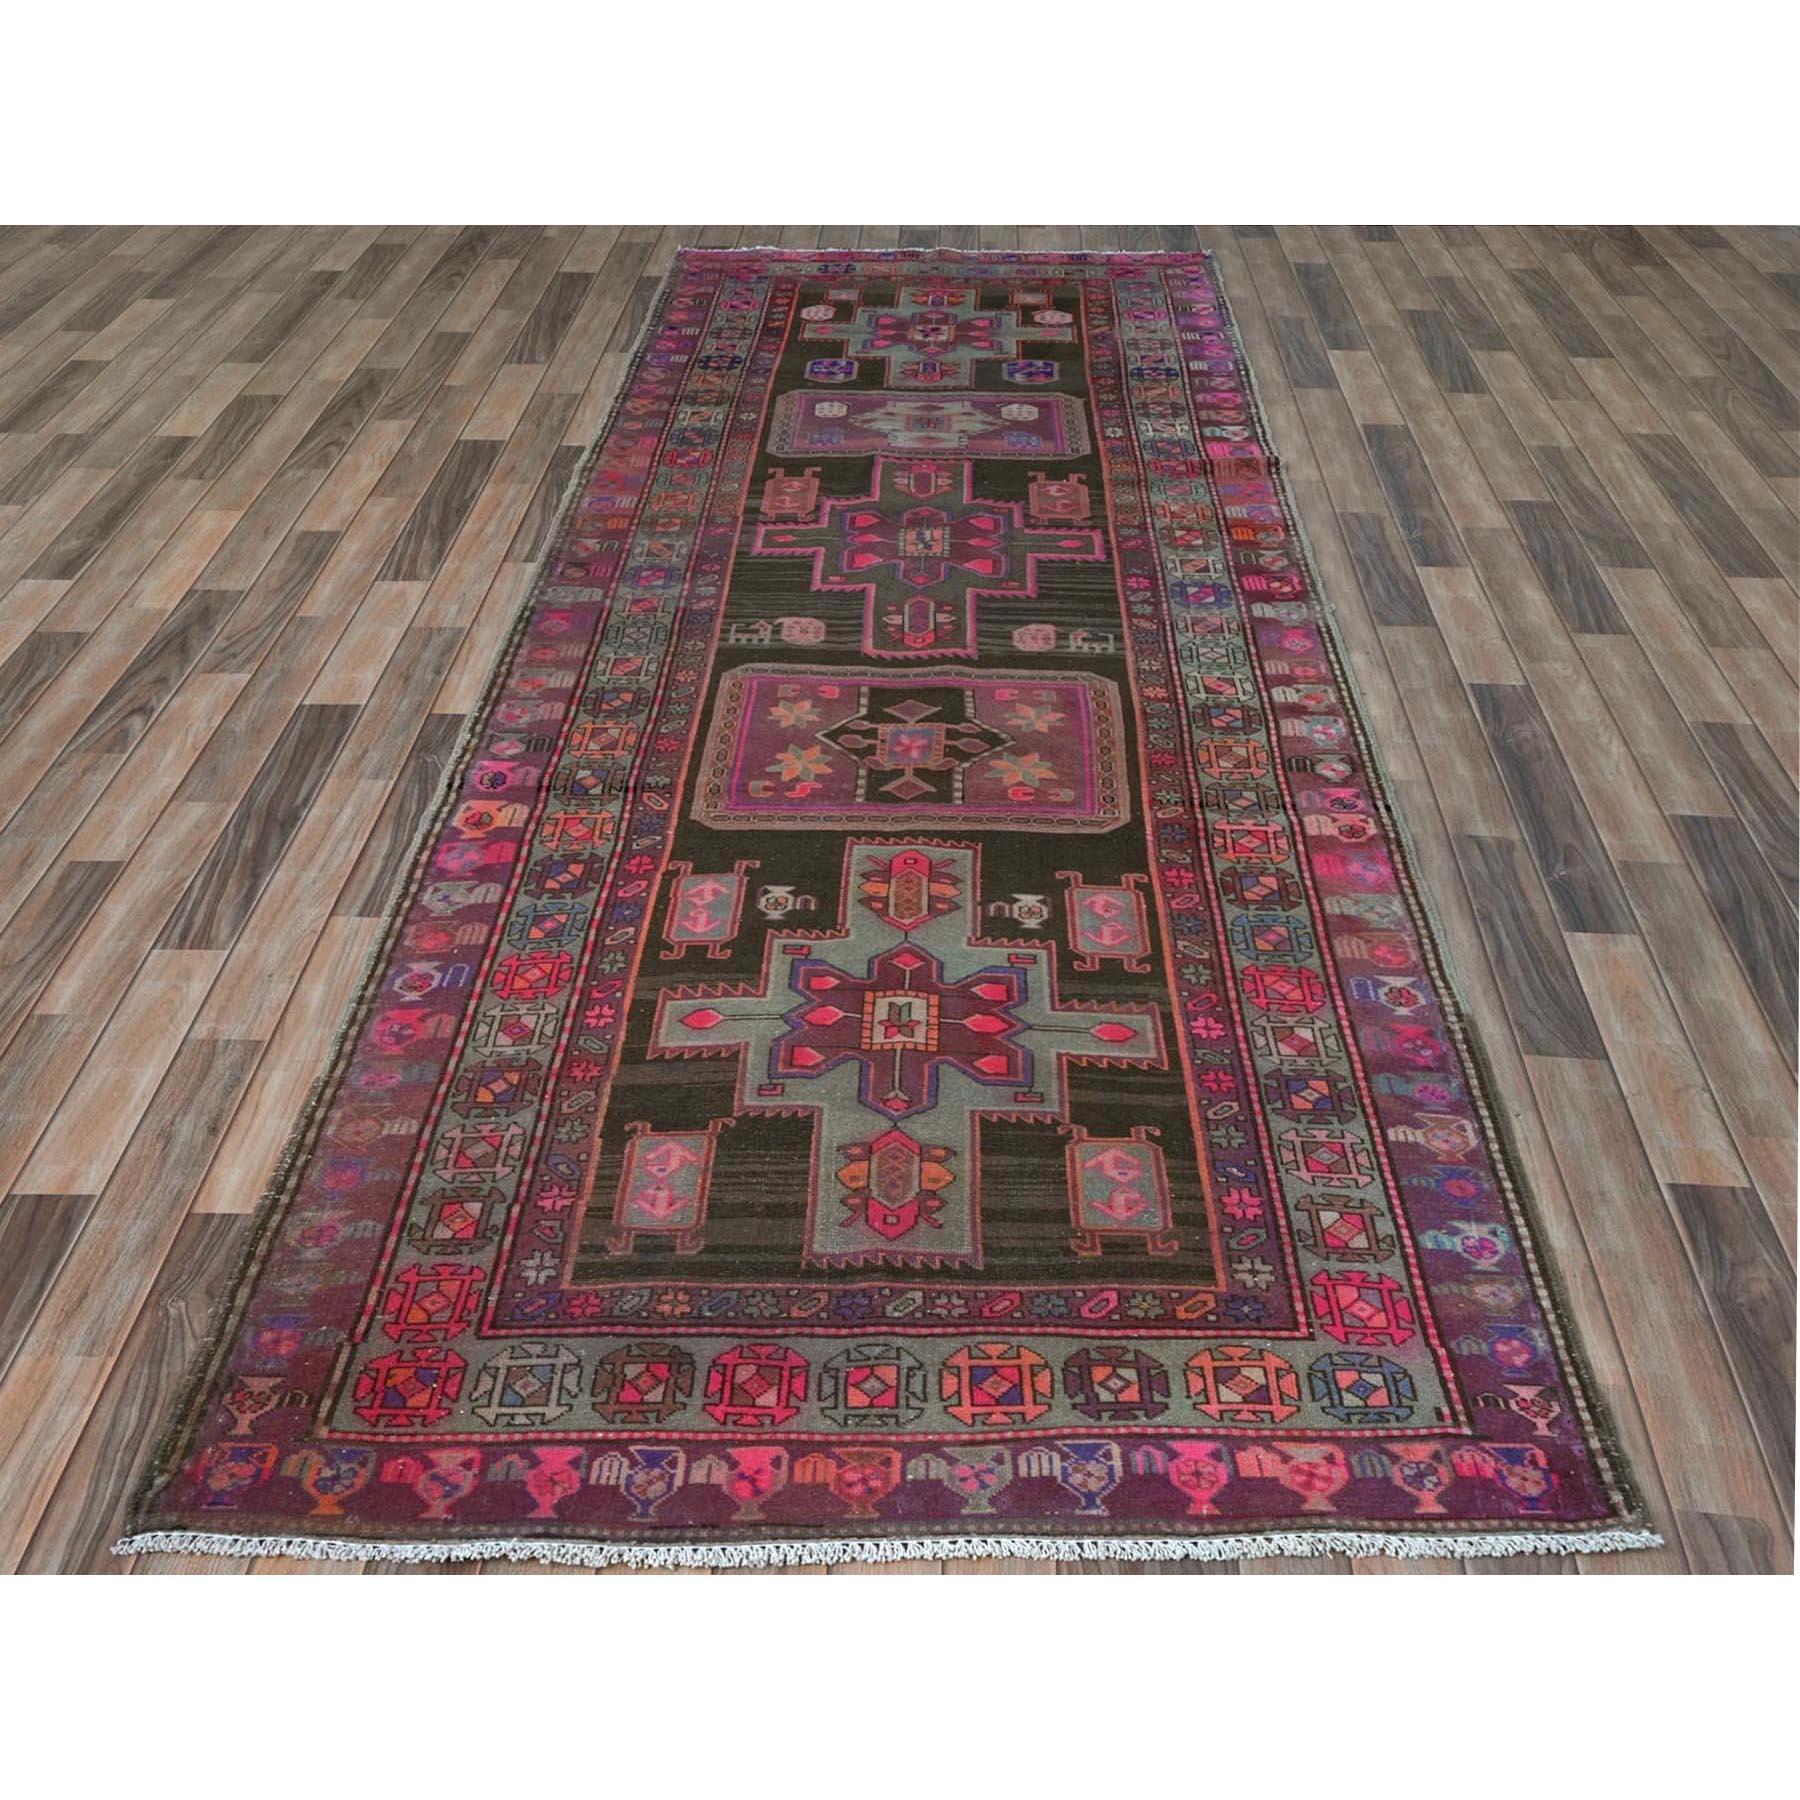 This fabulous Hand-Knotted carpet has been created and designed for extra strength and durability. This rug has been handcrafted for weeks in the traditional method that is used to make
Exact Rug Size in Feet and Inches : 4'3